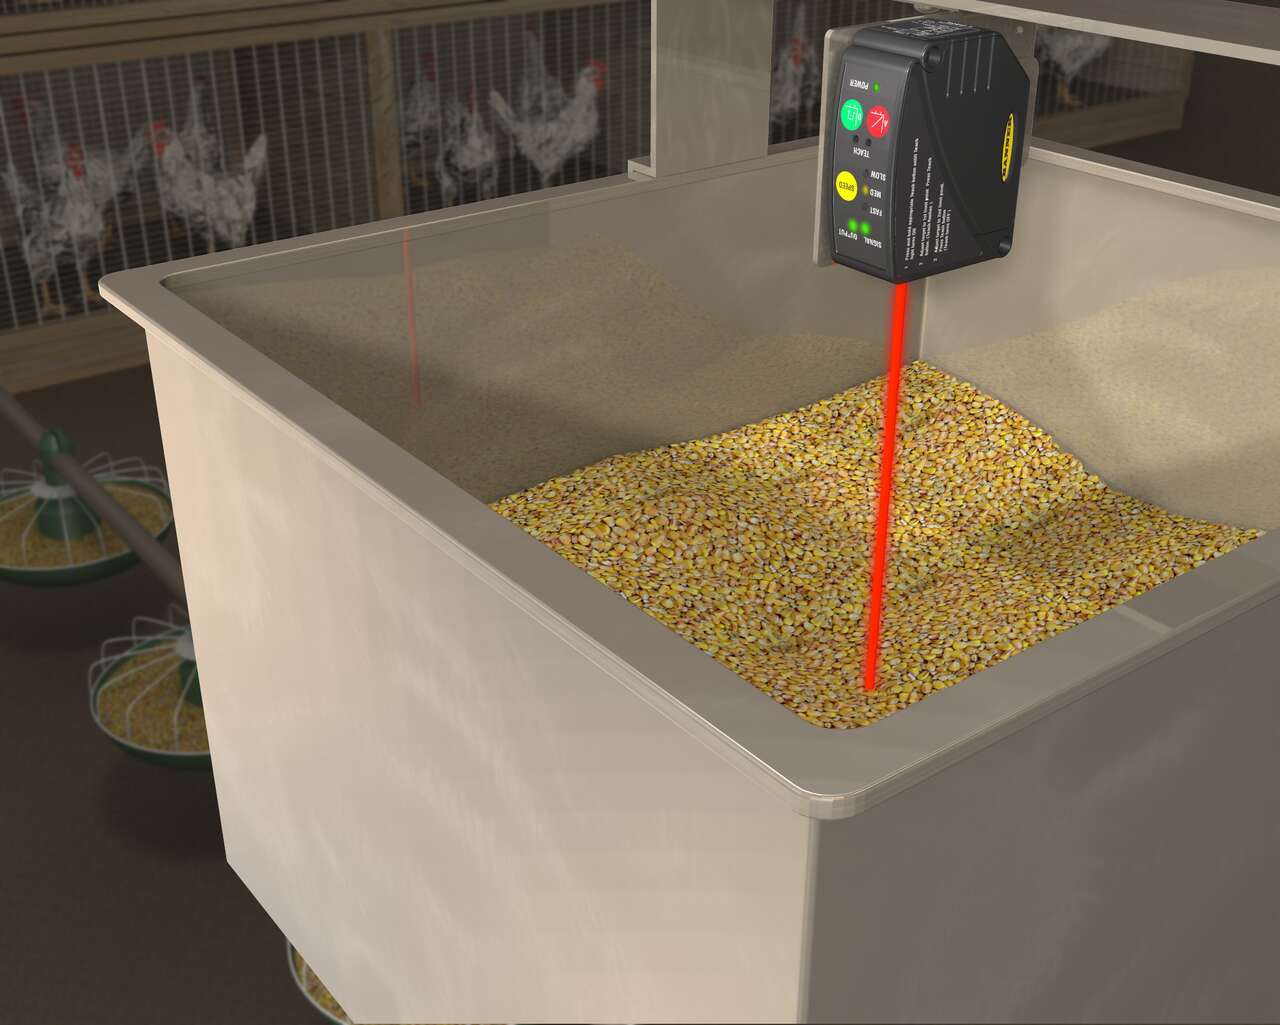 Fill Level of Dry Material in a Hopper